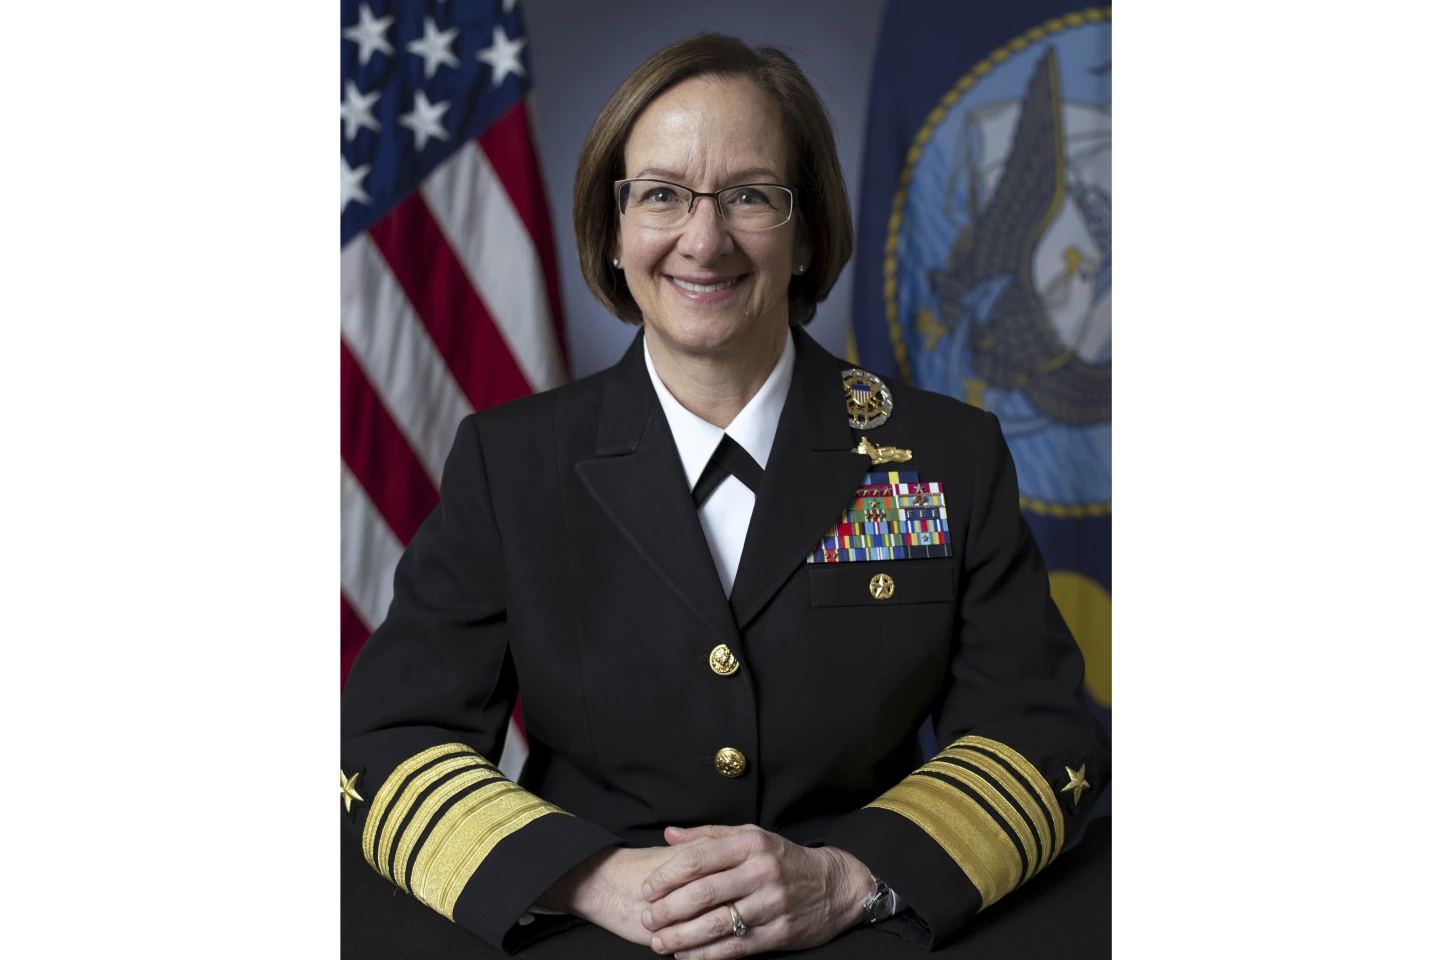 President Biden Picks Vice Chief of Naval Operations Adm. Lisa Franchetti, First Woman on Joint Chiefs of Staff to Lead Navy